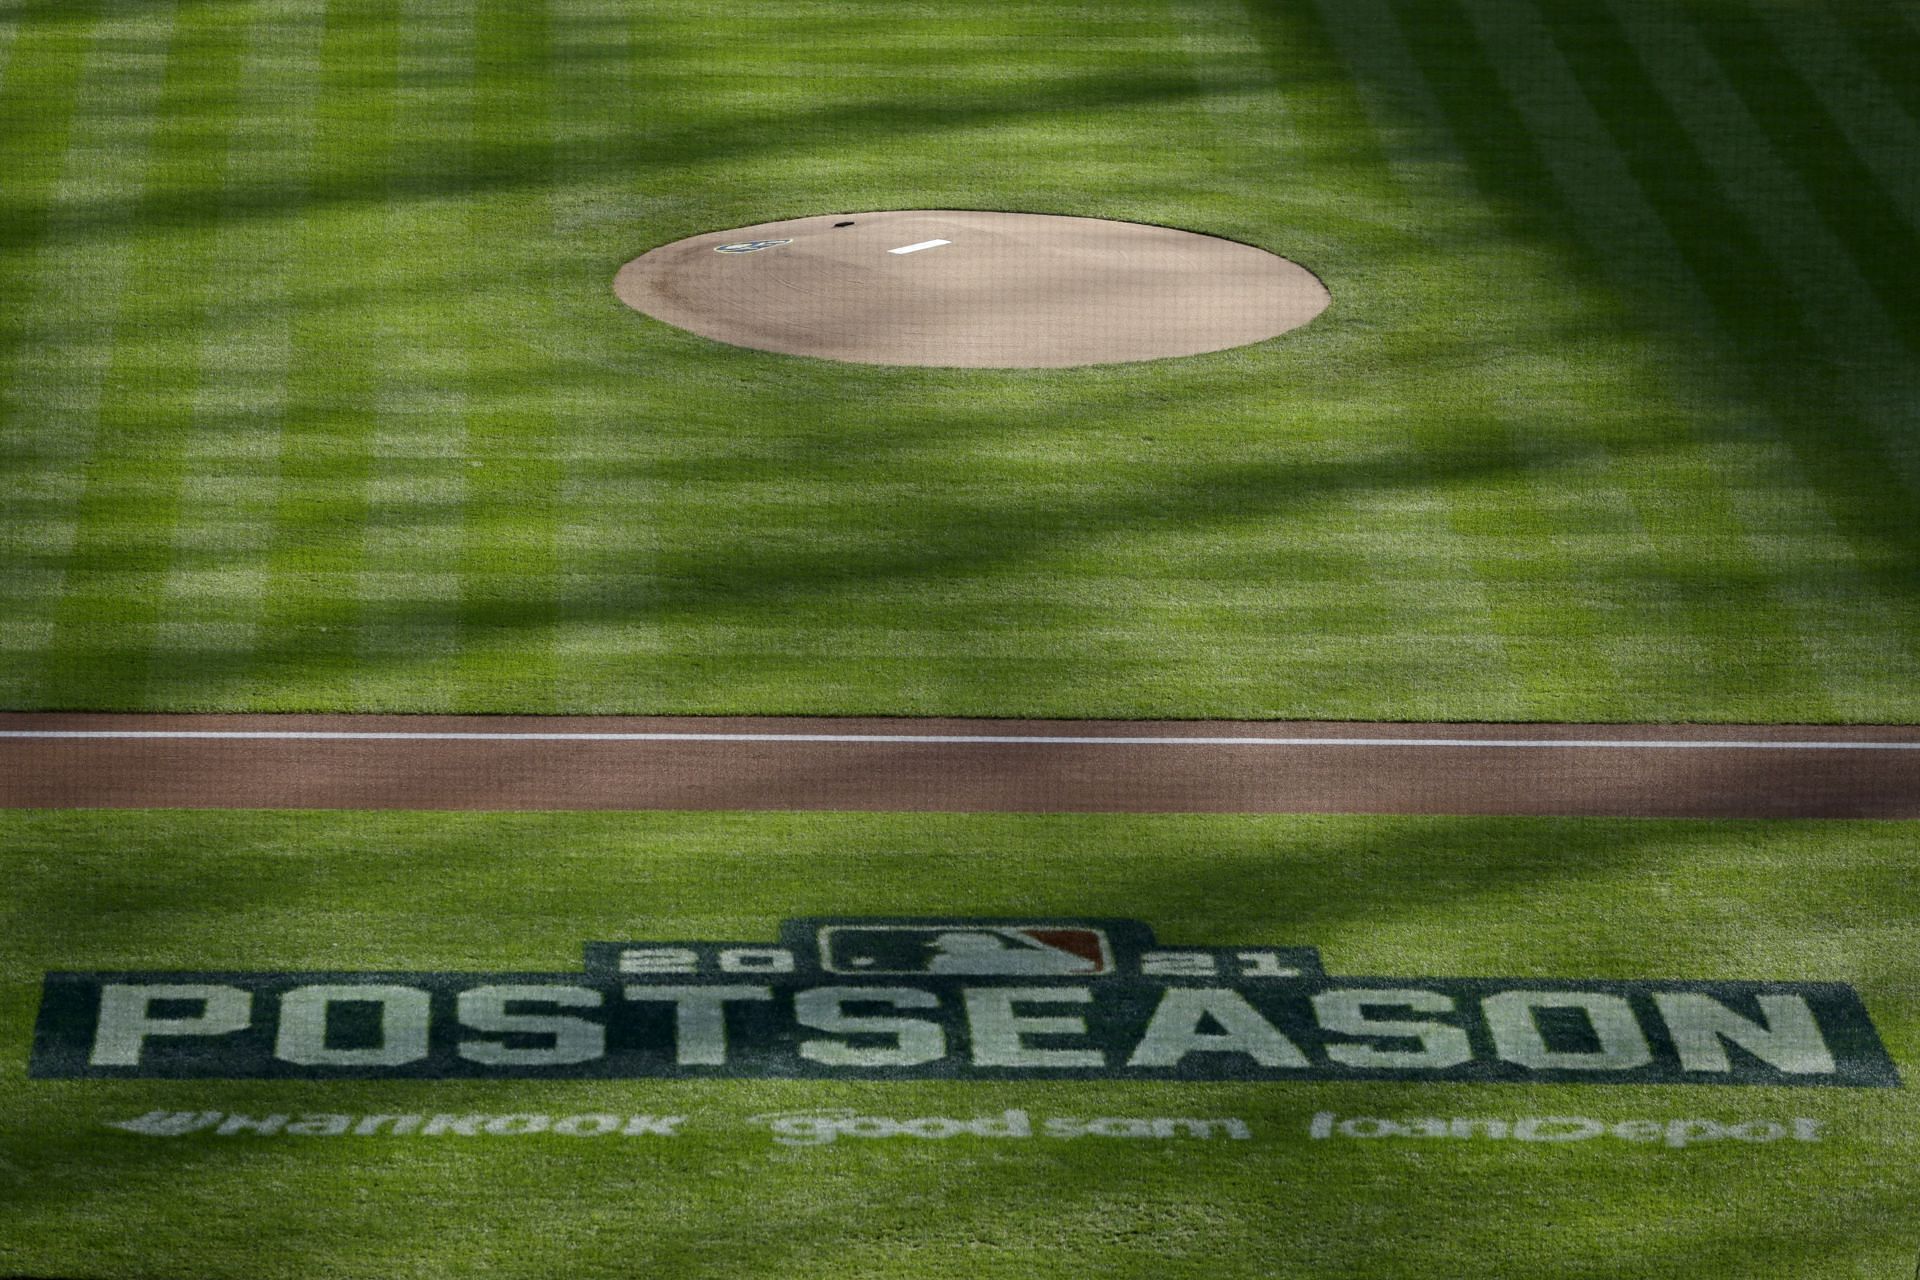 MLB post season logo on the field prior to game 2 of the National League Division Series